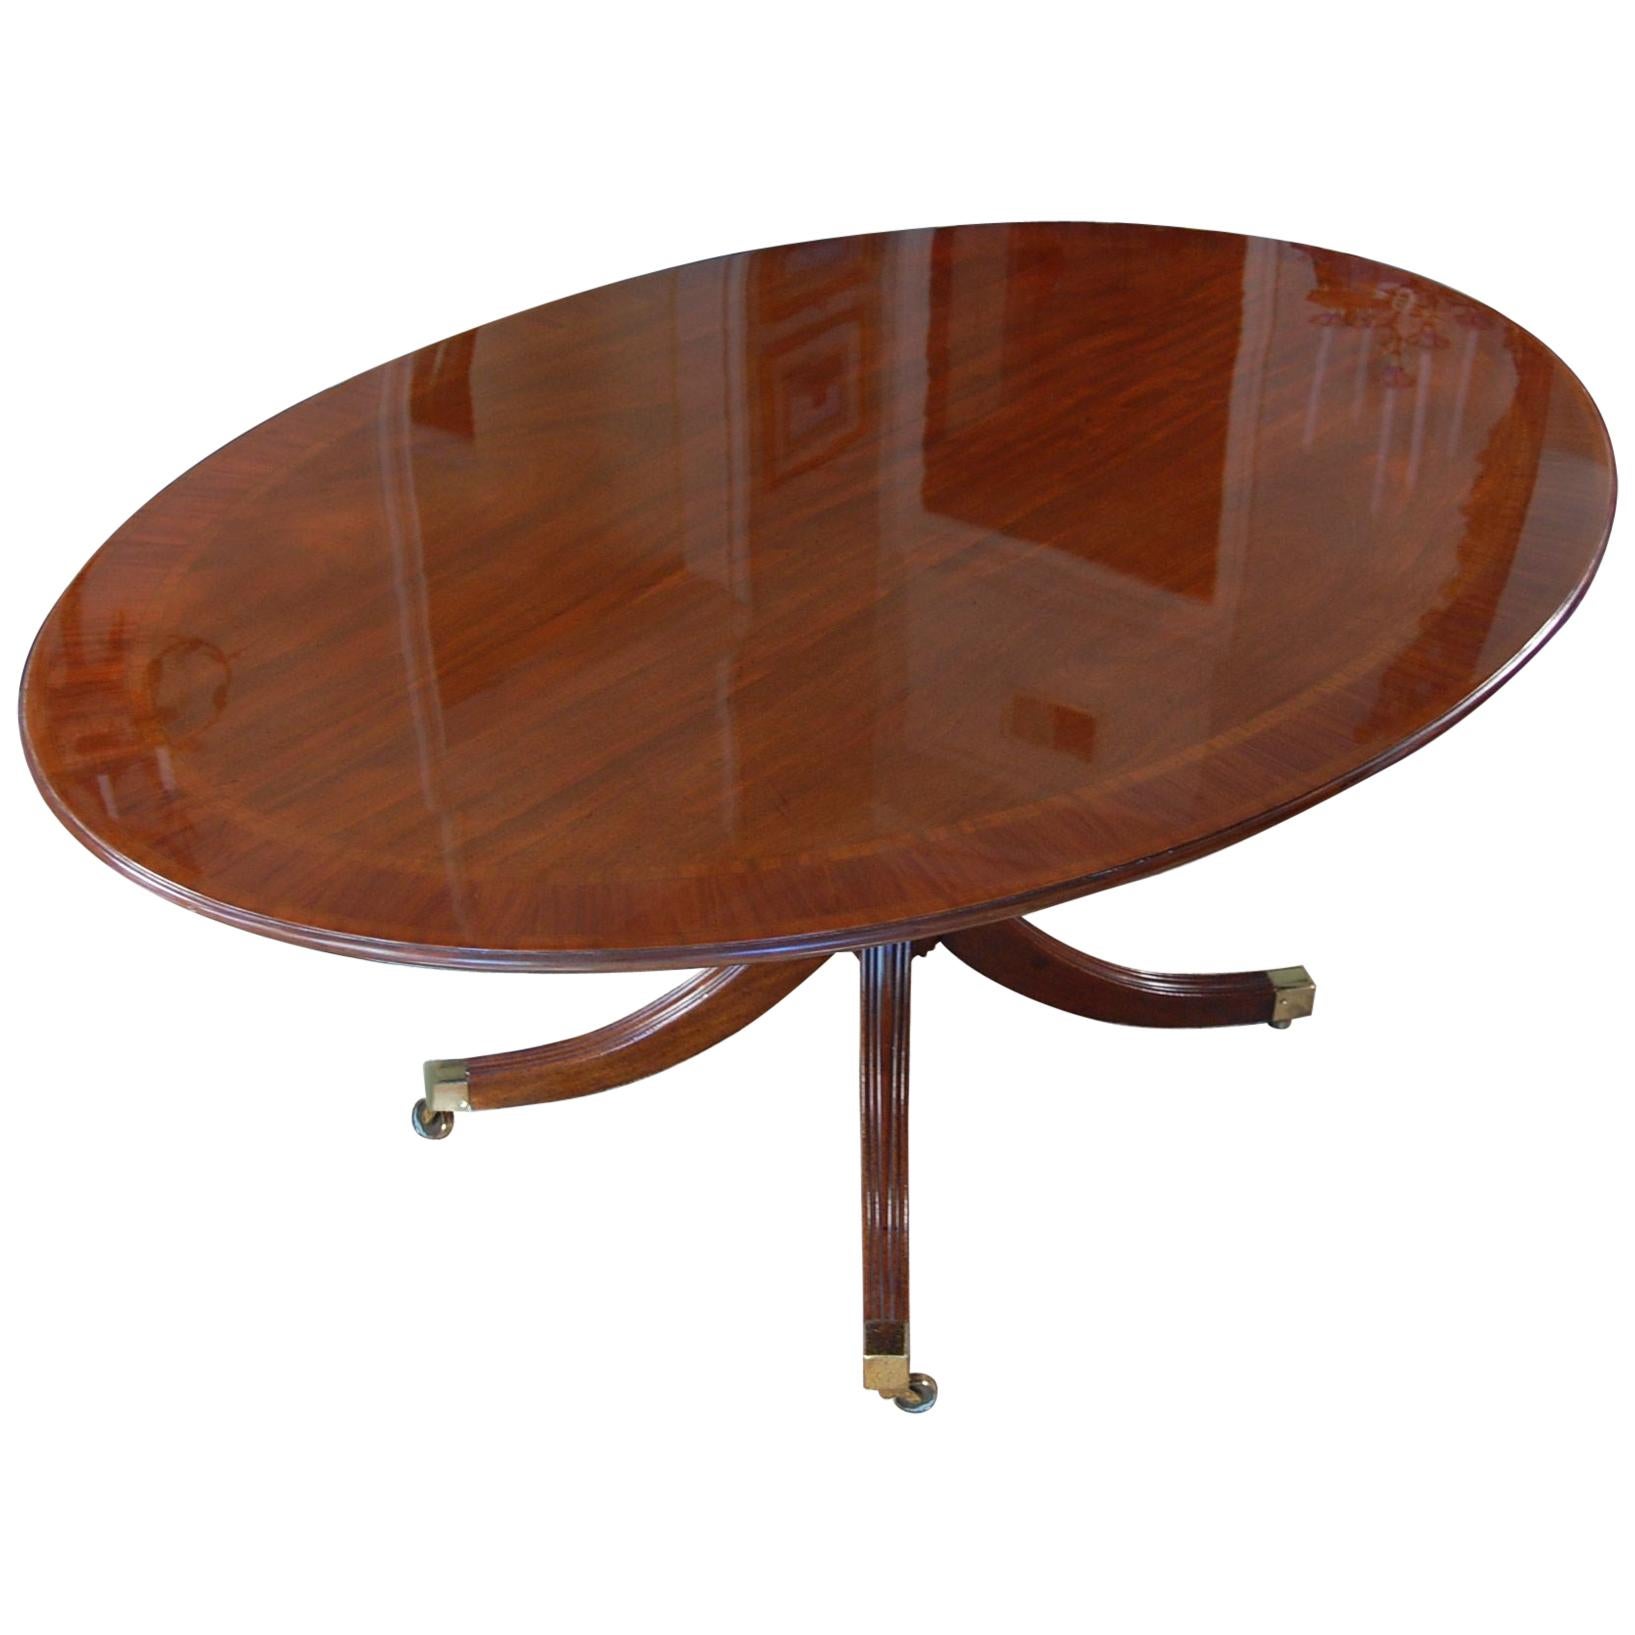 George III Style Banded Mahogany Oval Dining Room Table on Single Pedestal Base